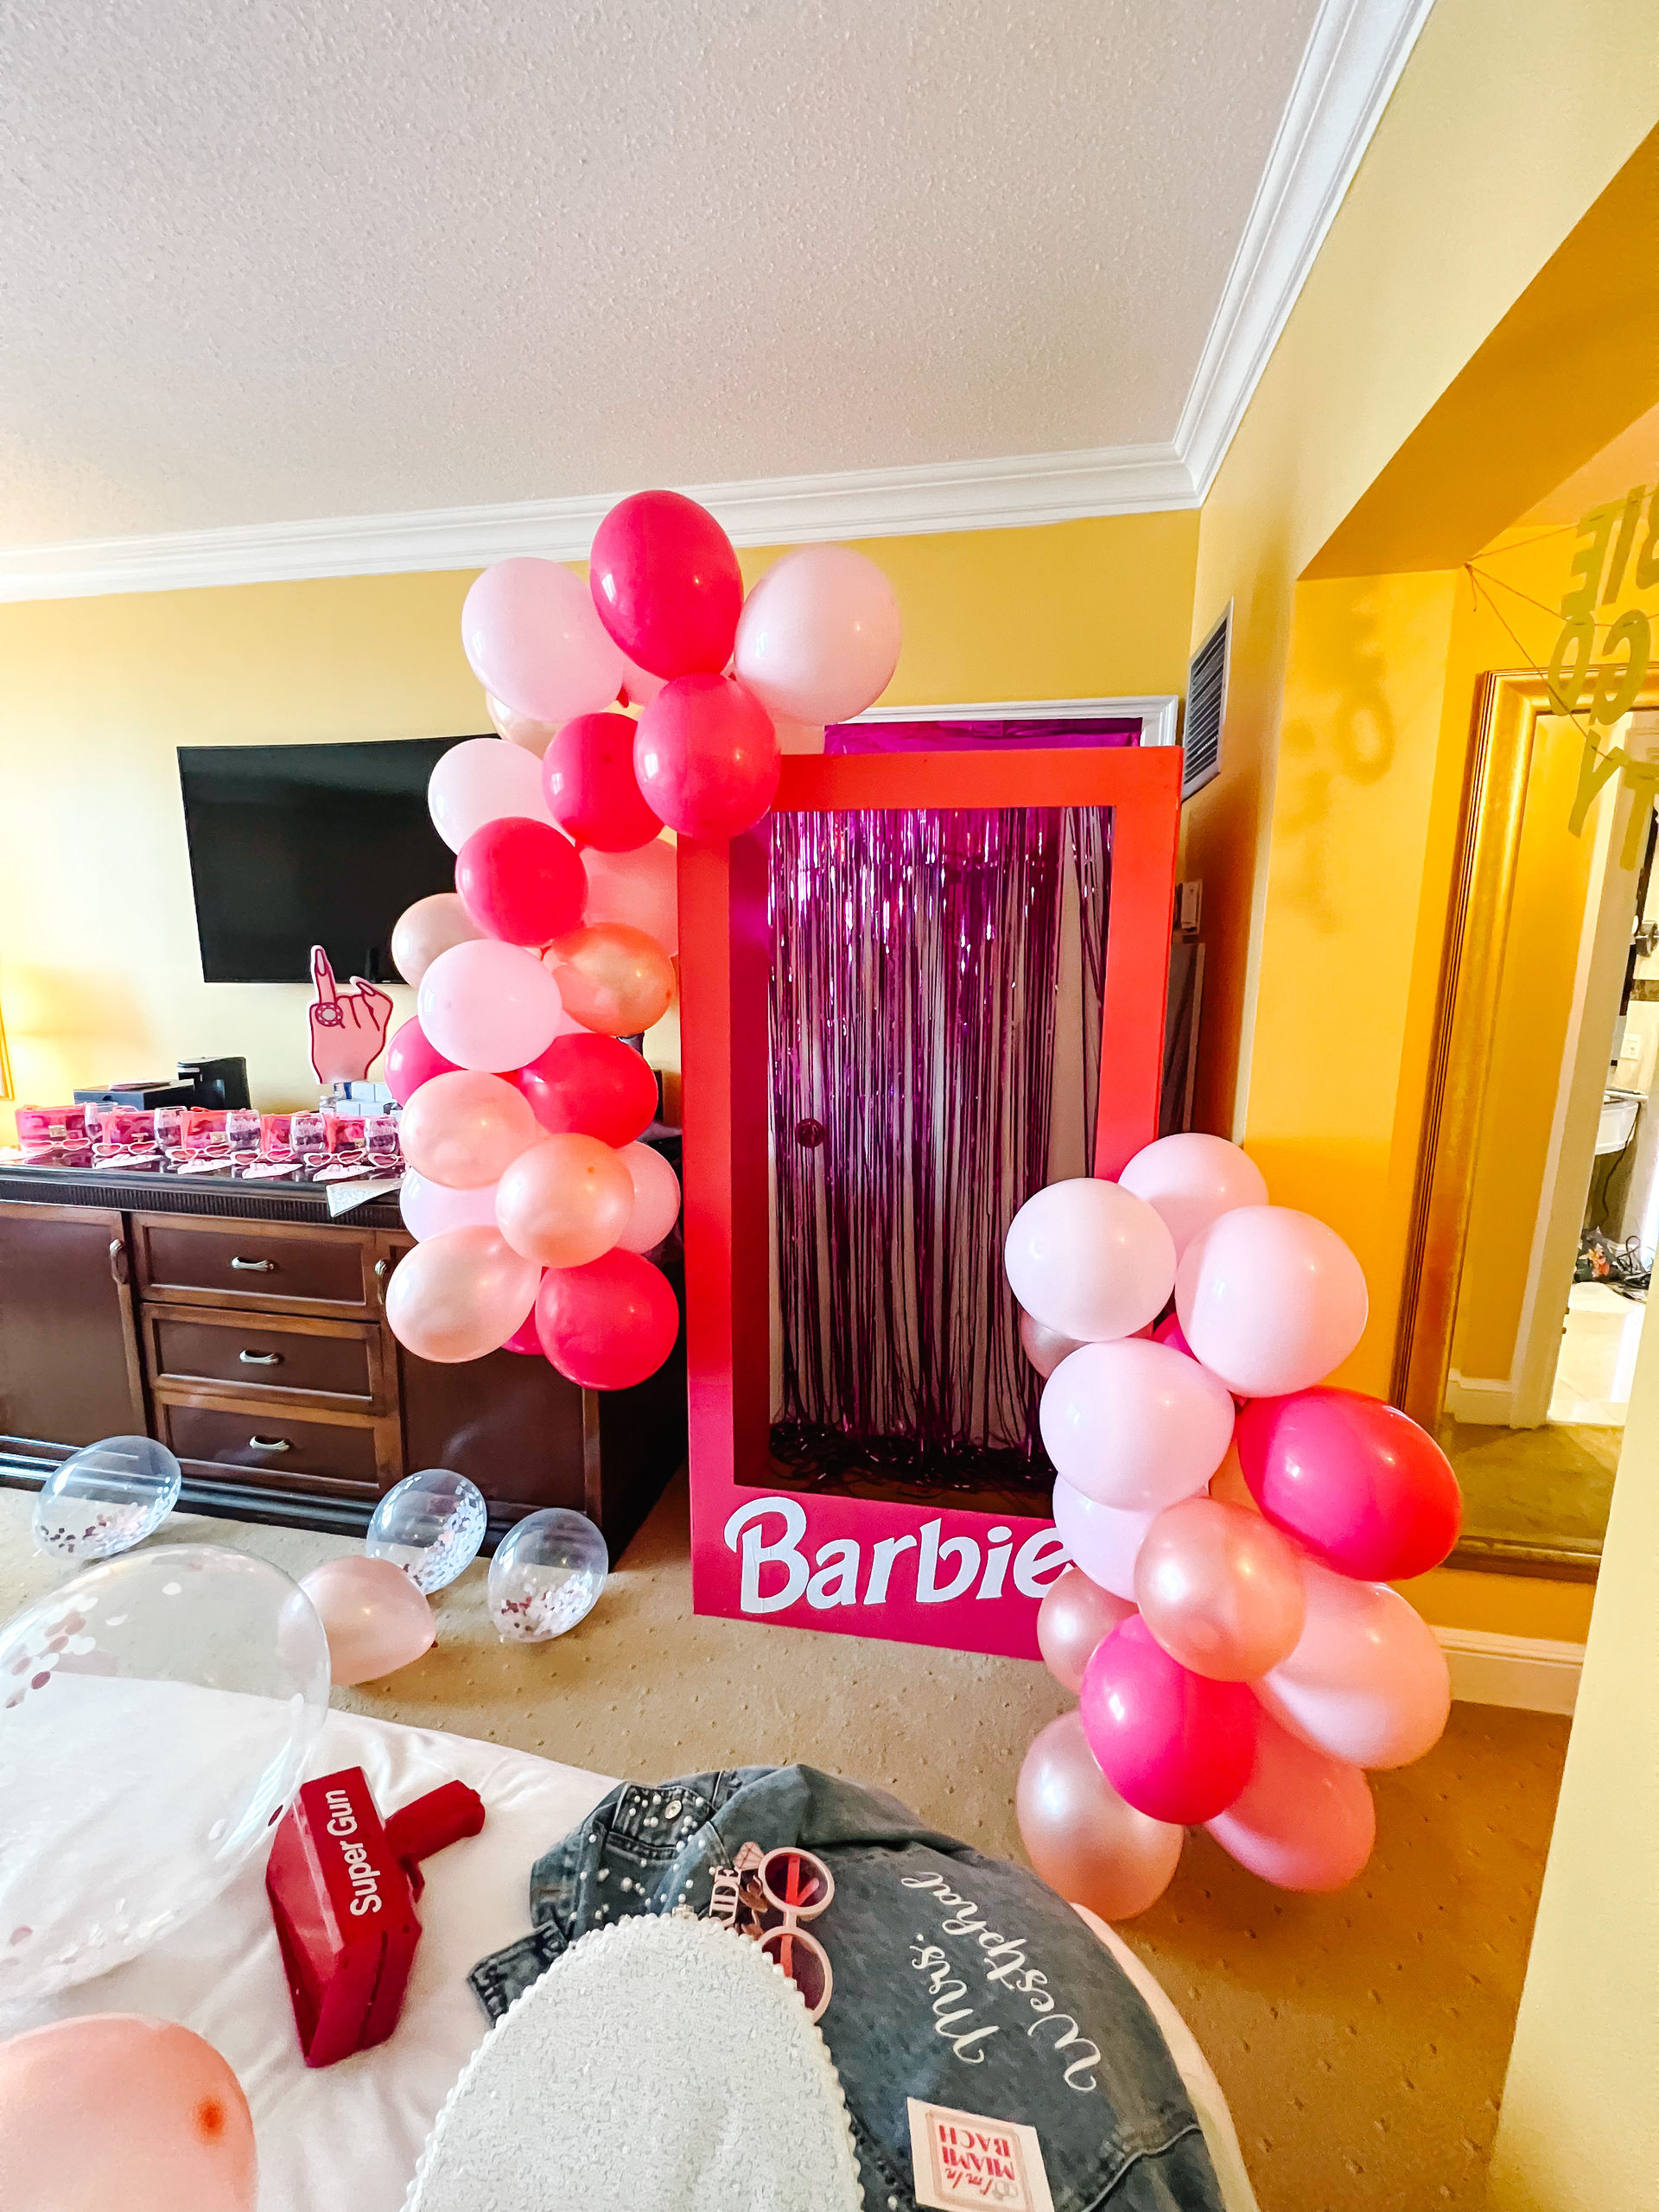 Party Decoration Packages with Delivery and Setup Included: Basic